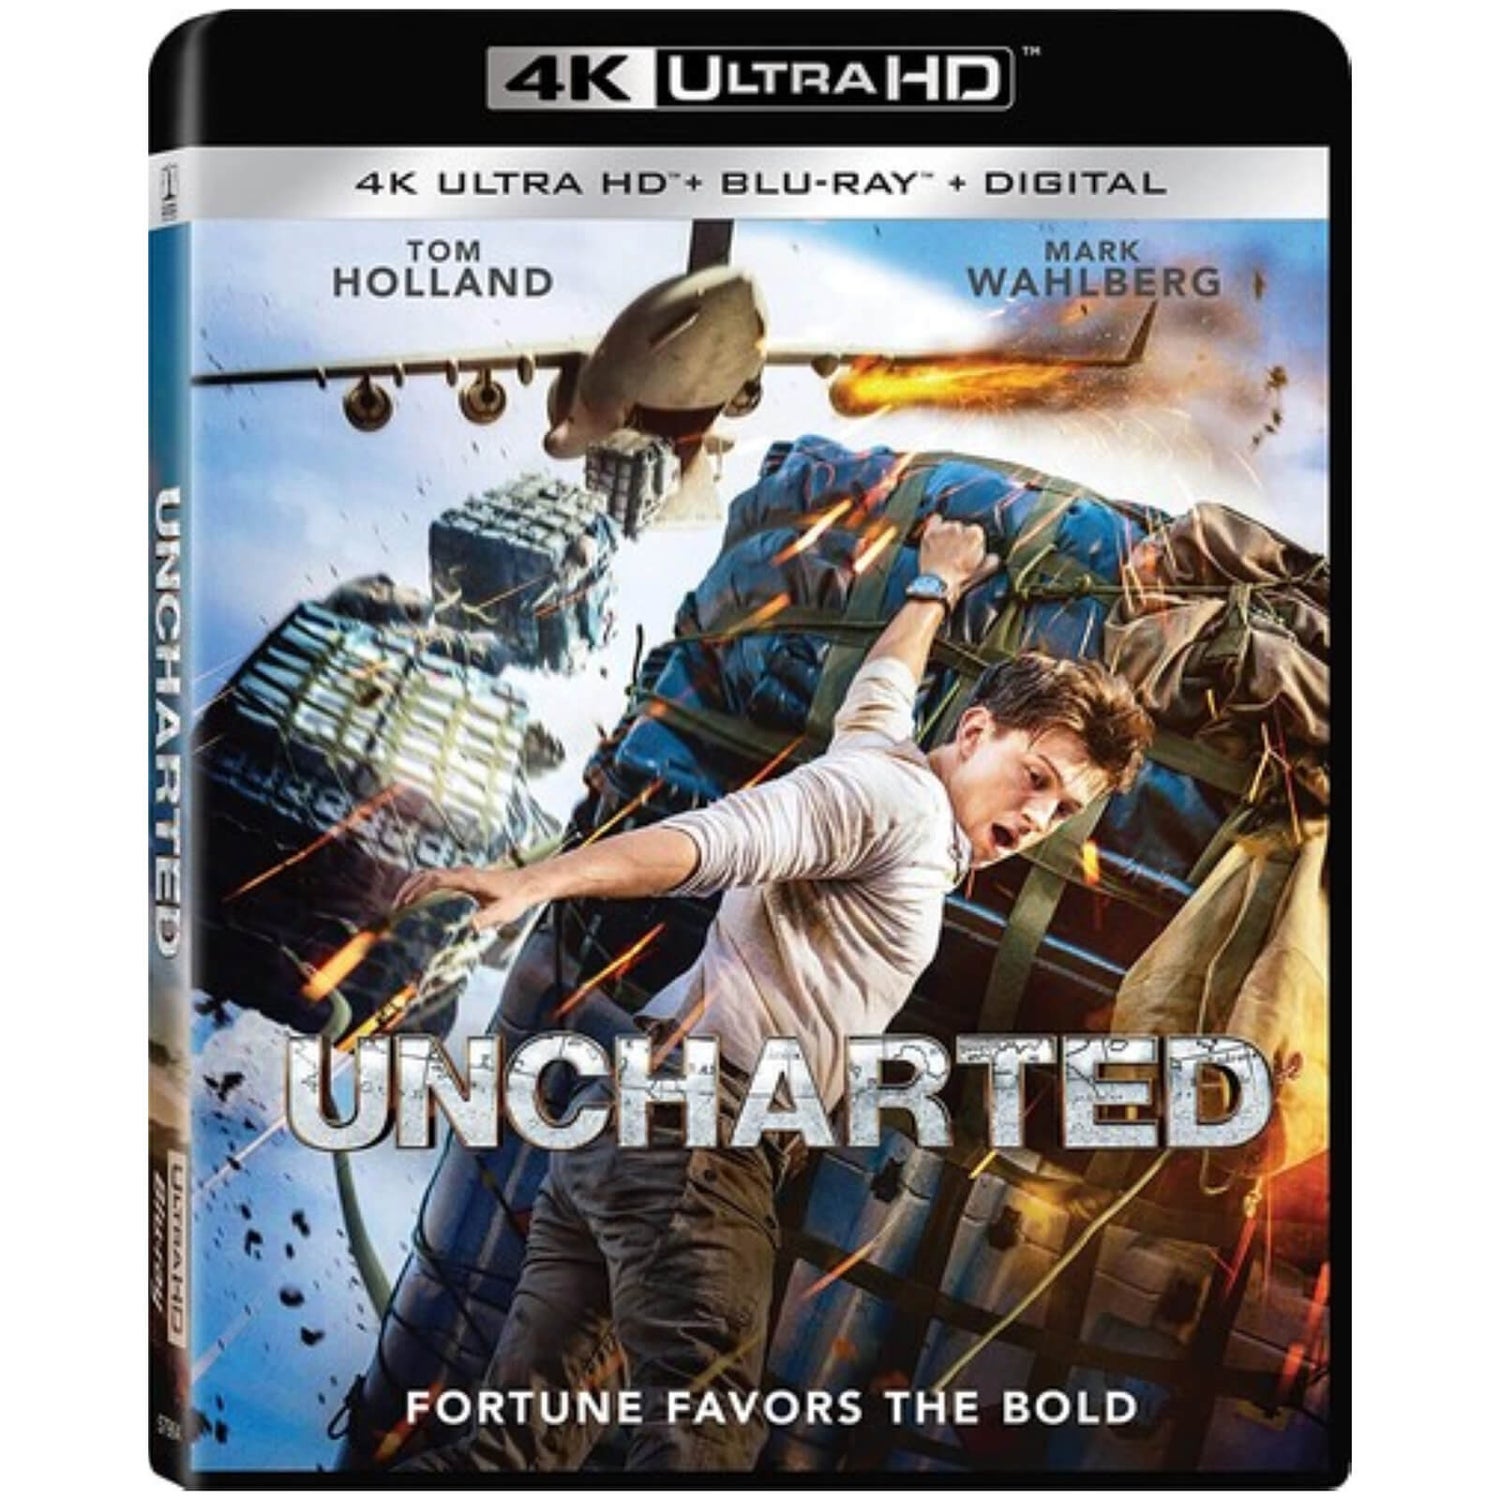 Uncharted - 4K Ultra HD (Includes Blu-ray)